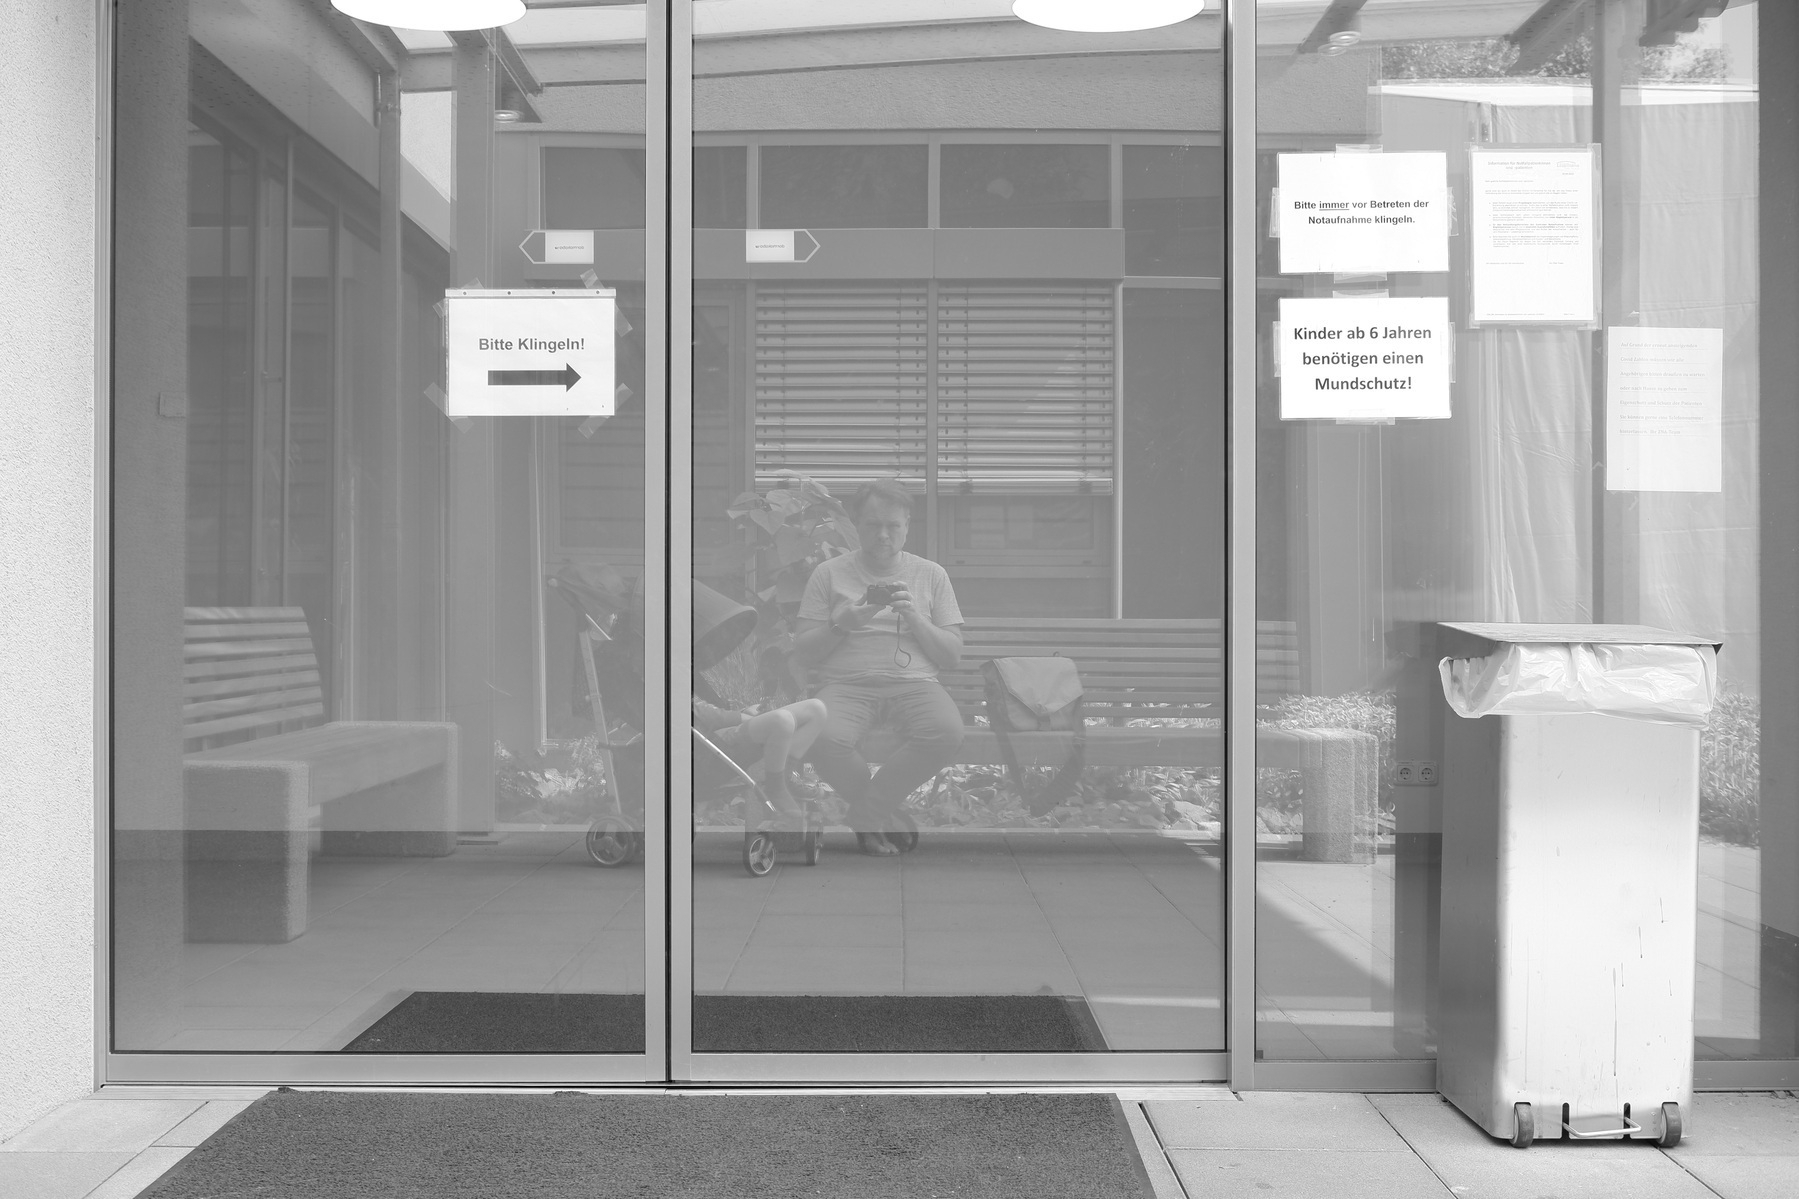 A photo of the reflection of my son in the buggy and me in front of the door of the emergency room.